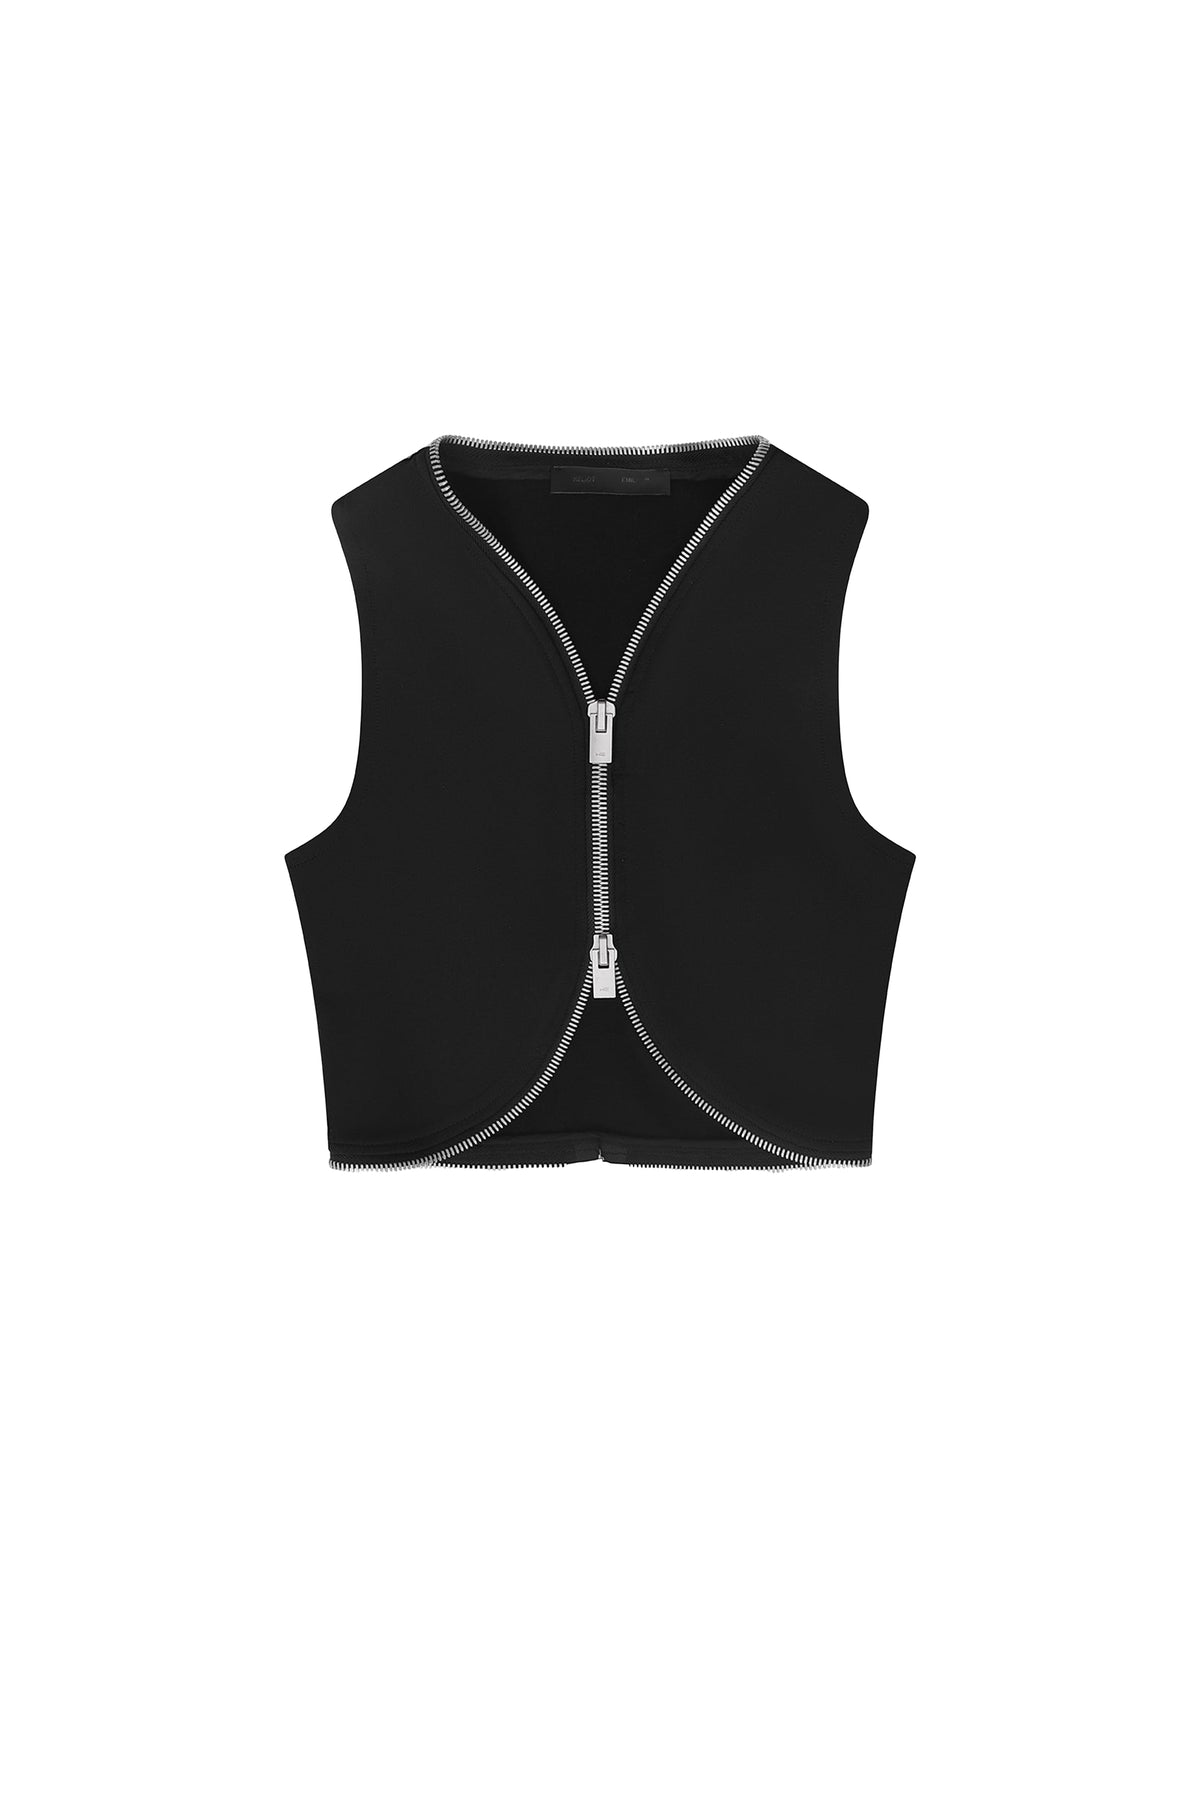 OBOVATE JERSEY TOP / BLK